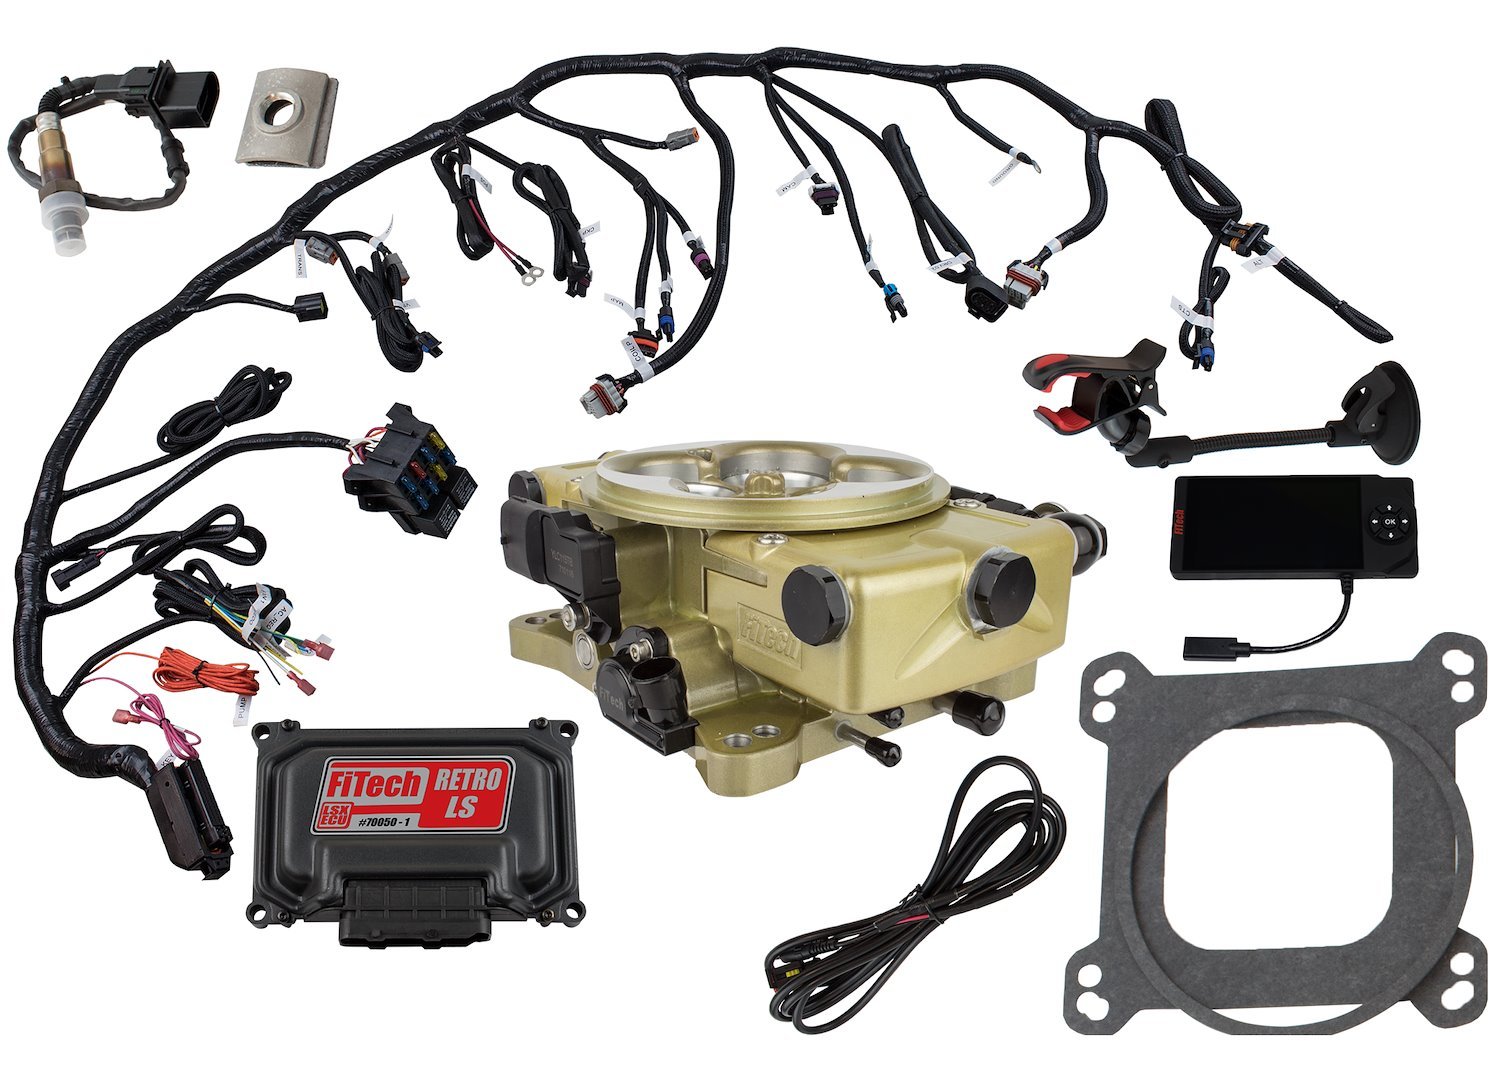 Fitech Fuel Injection Retro Ls 600 Hp Throttle Body System Basic Kit